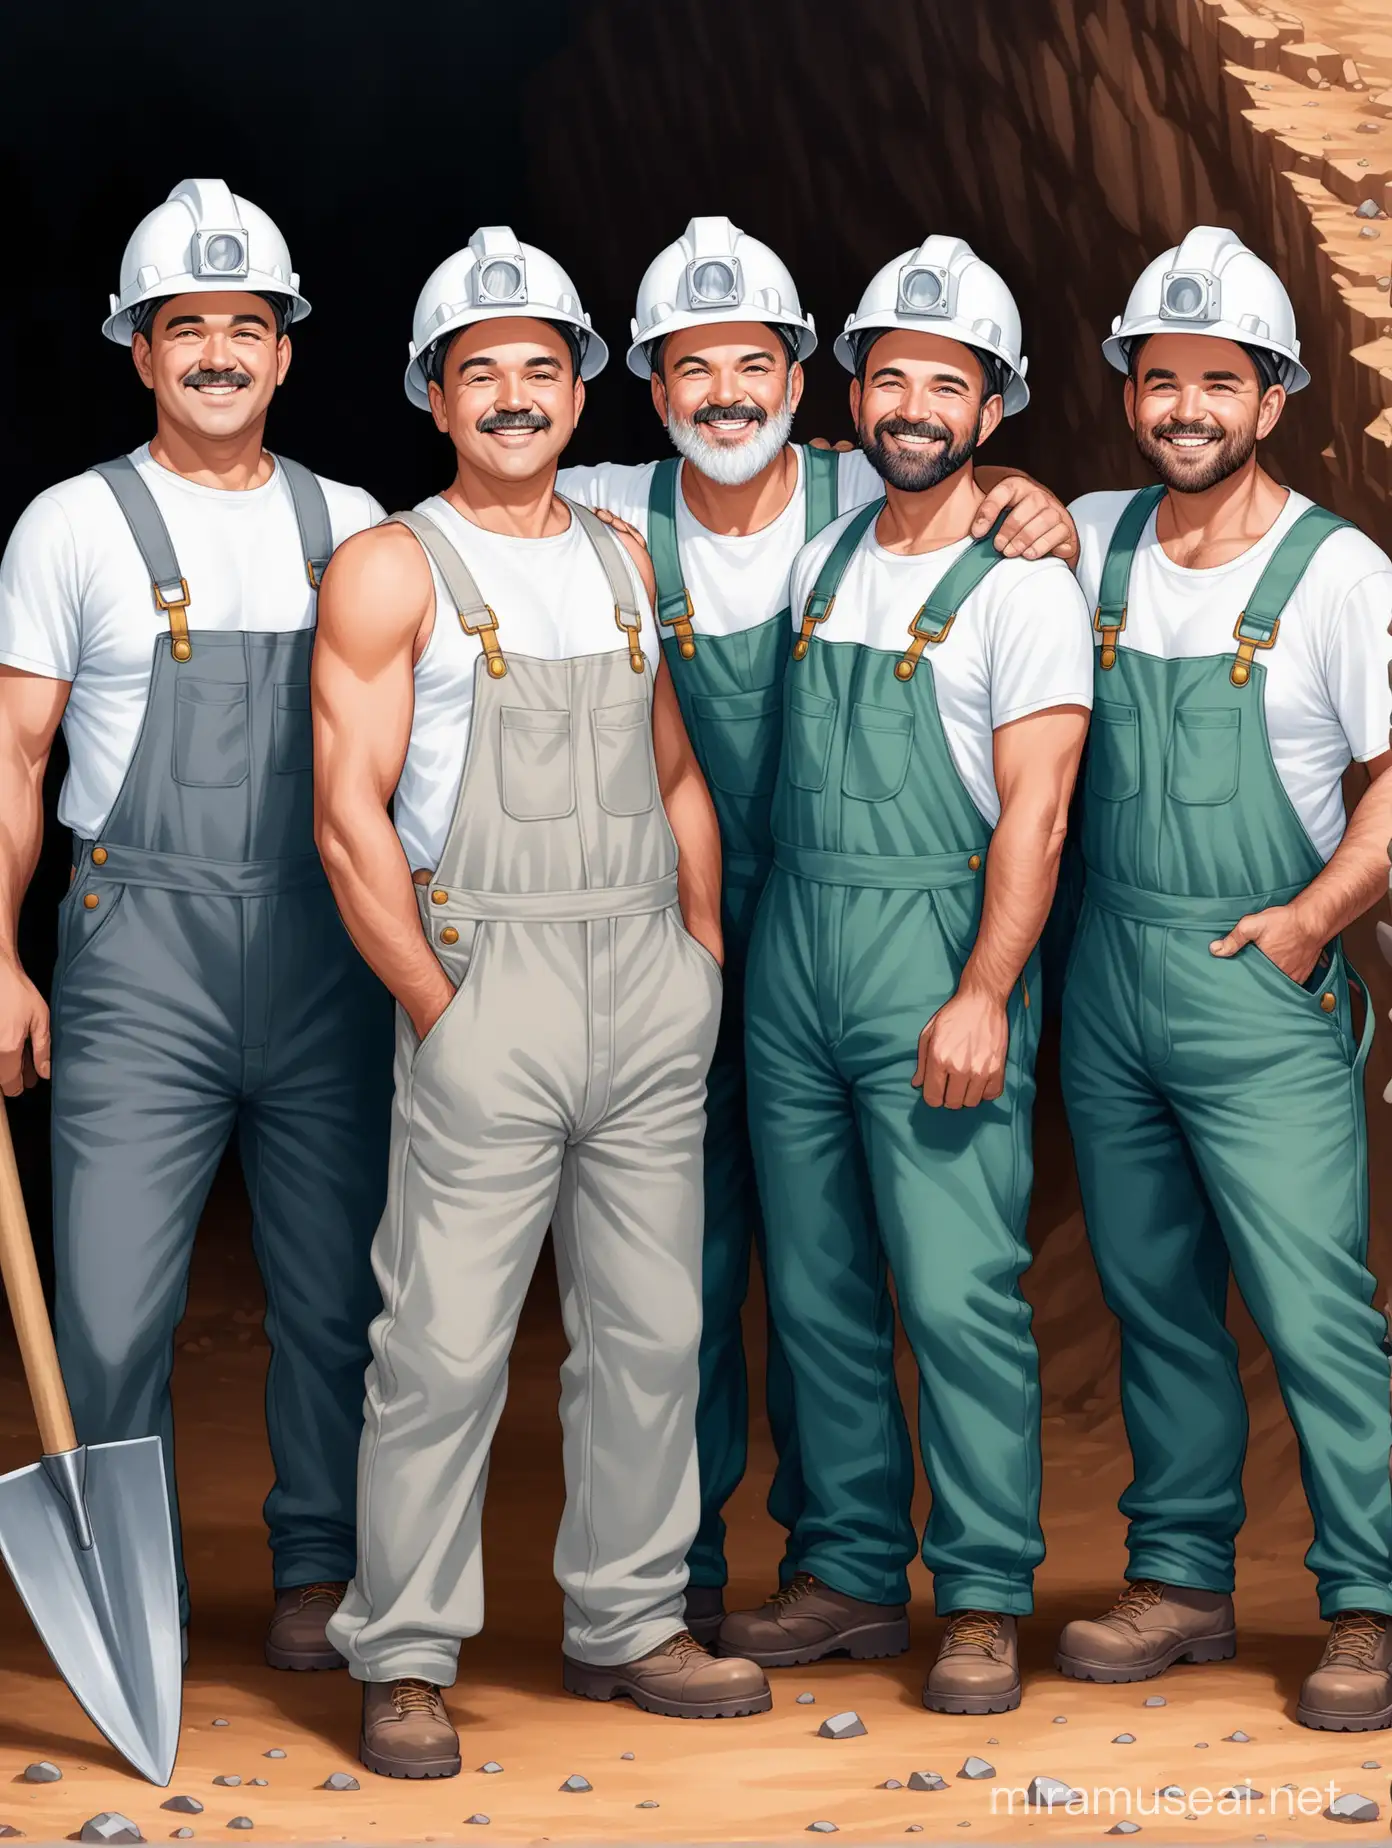 Cheerful Cartoon Miners Posed Together with Pickaxes